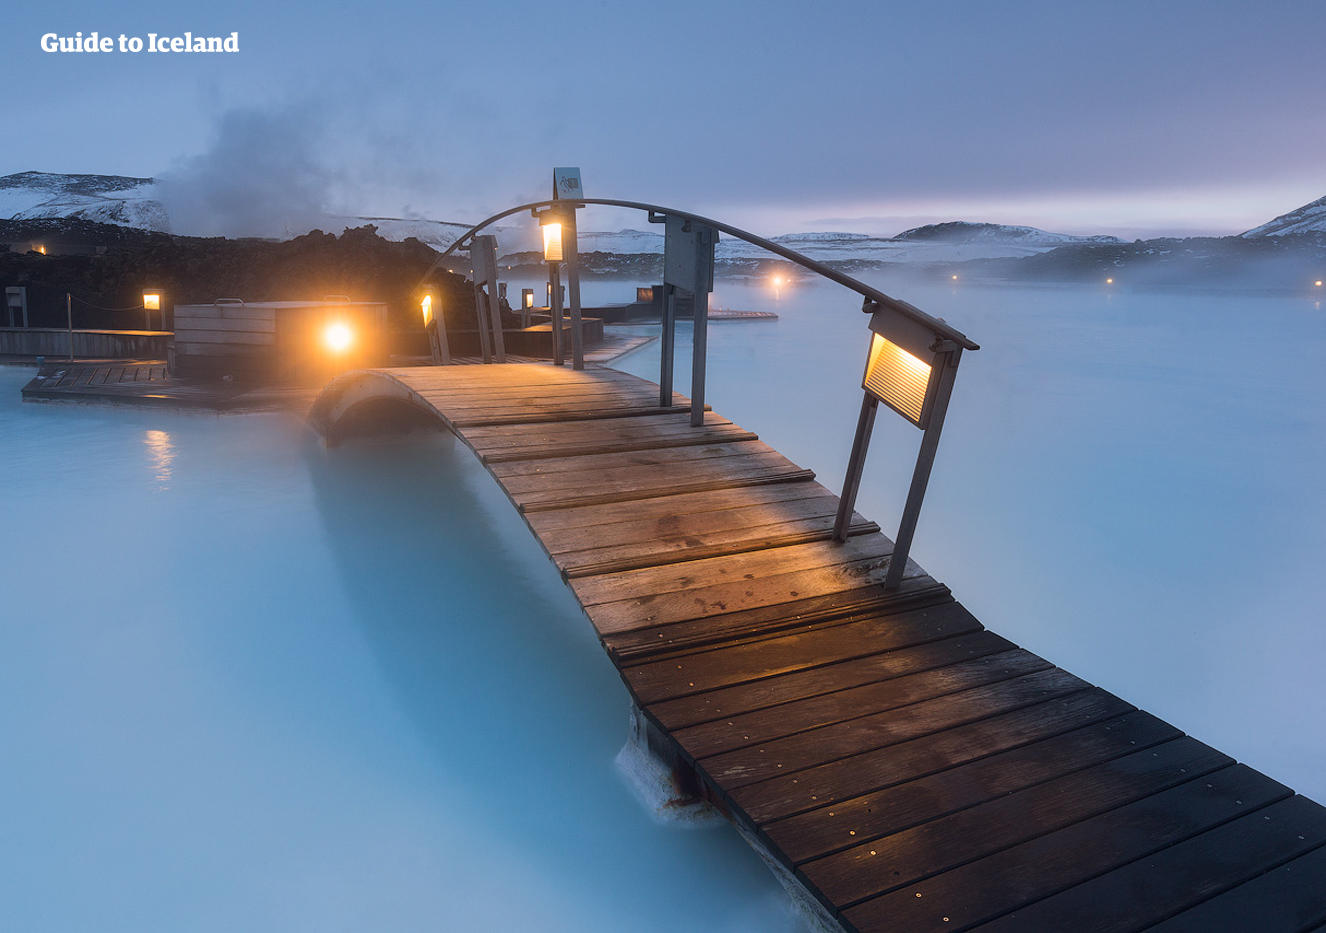 The Blue Lagoon company was founded in 1992; the doors opened for business officially that year.